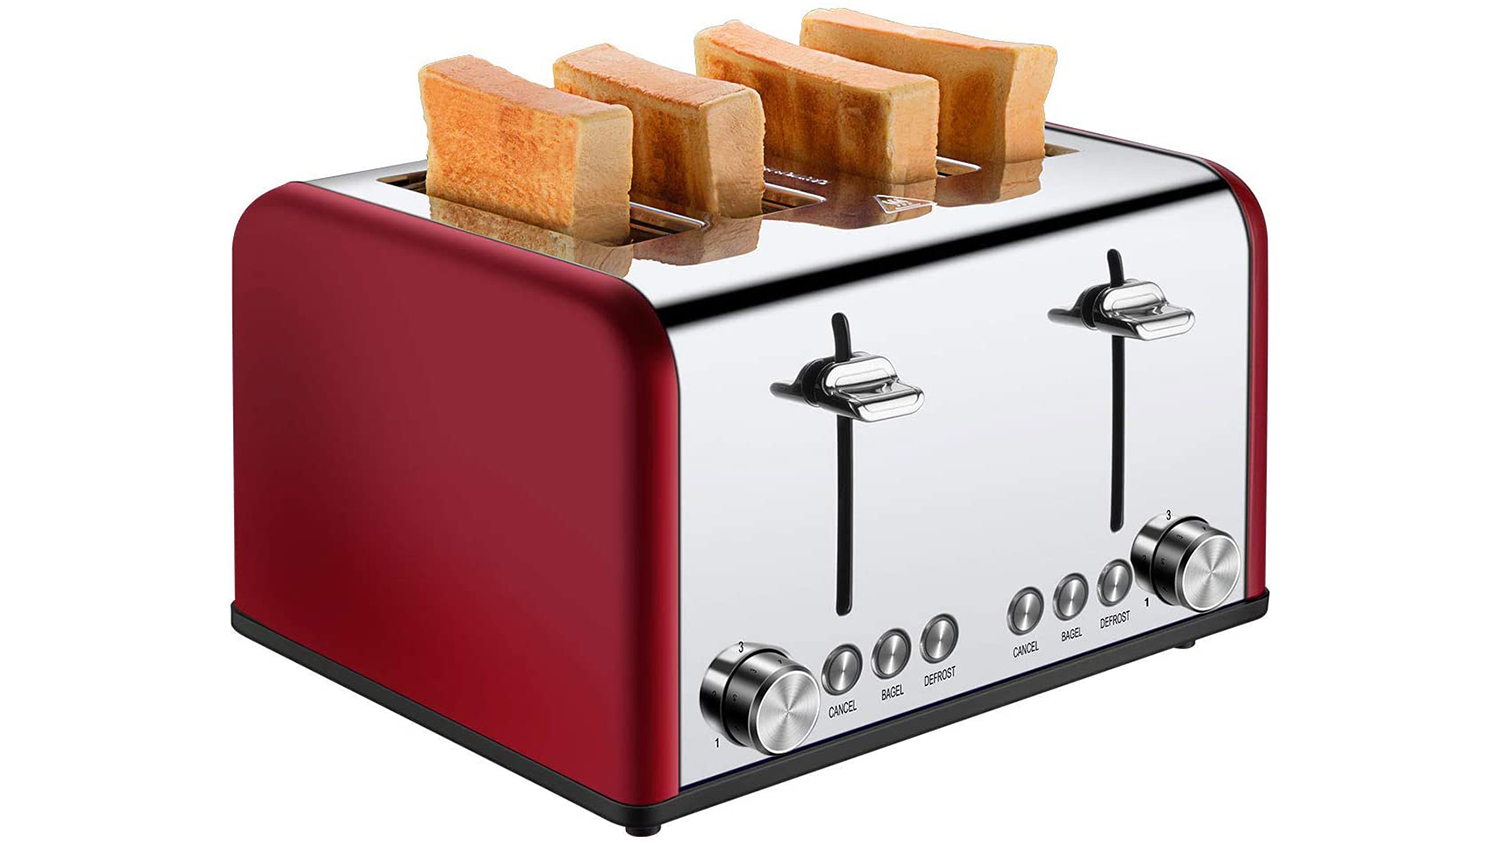  Xhuibop Cow Print Toaster Cover 4 Slice Bread Maker